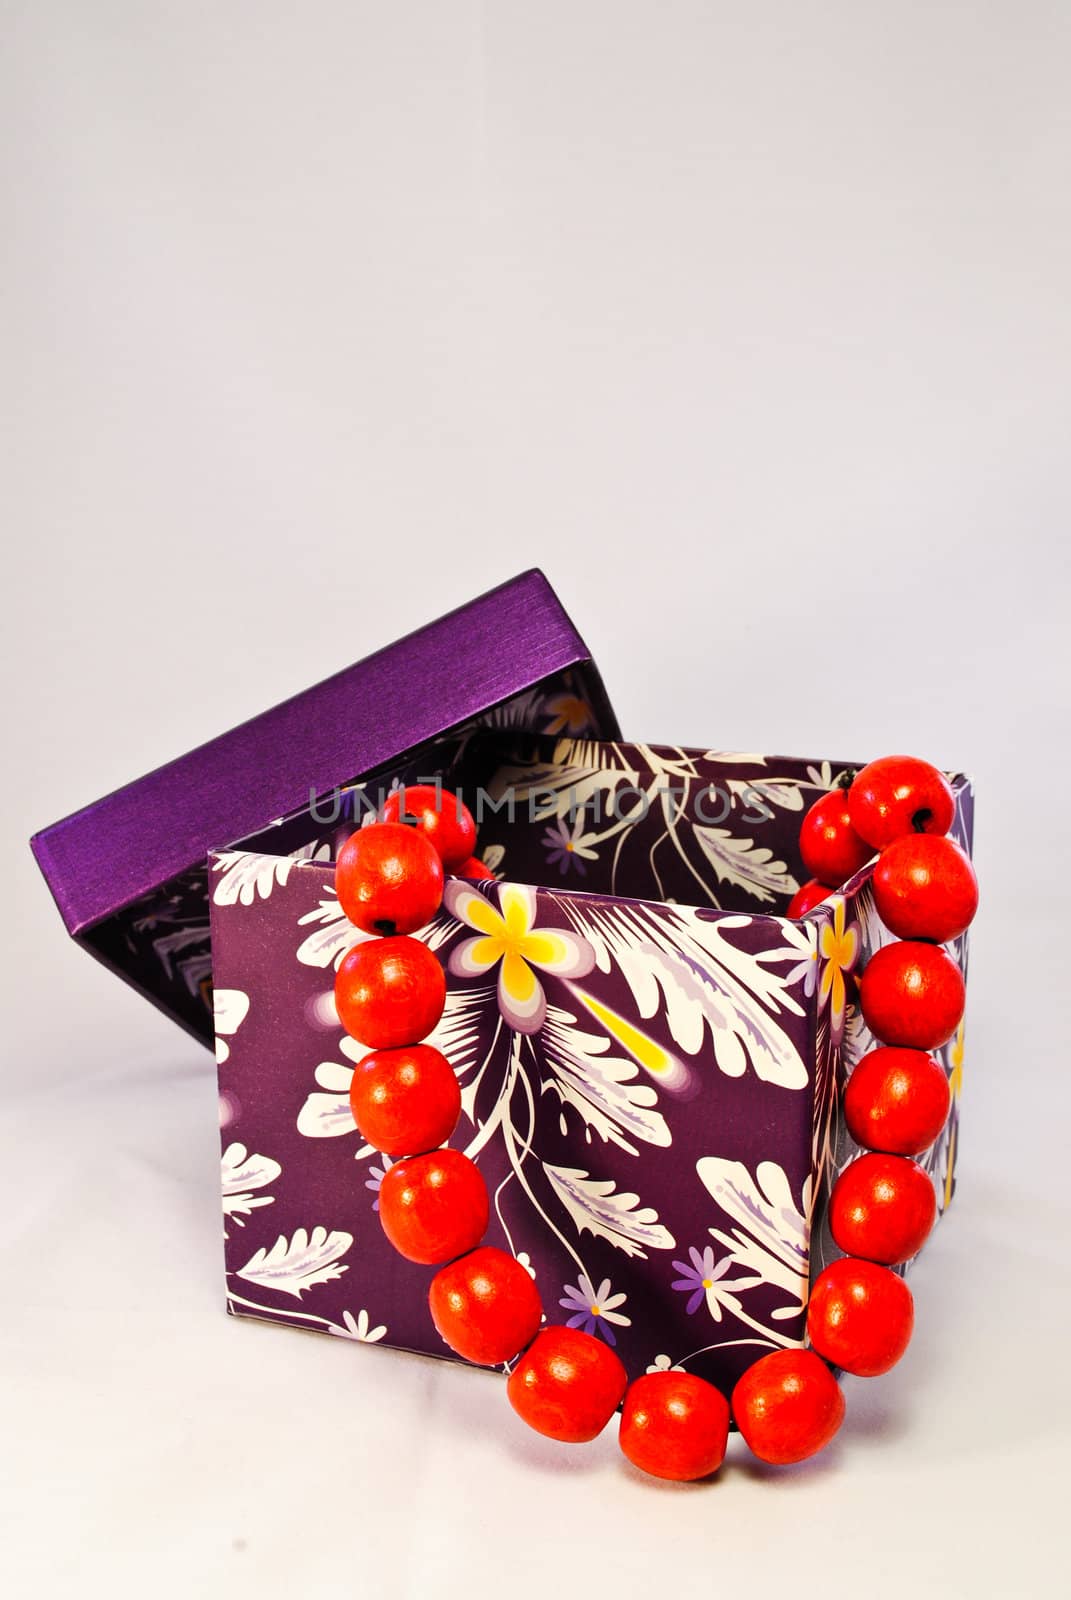 A purple gift box with red beads comming out